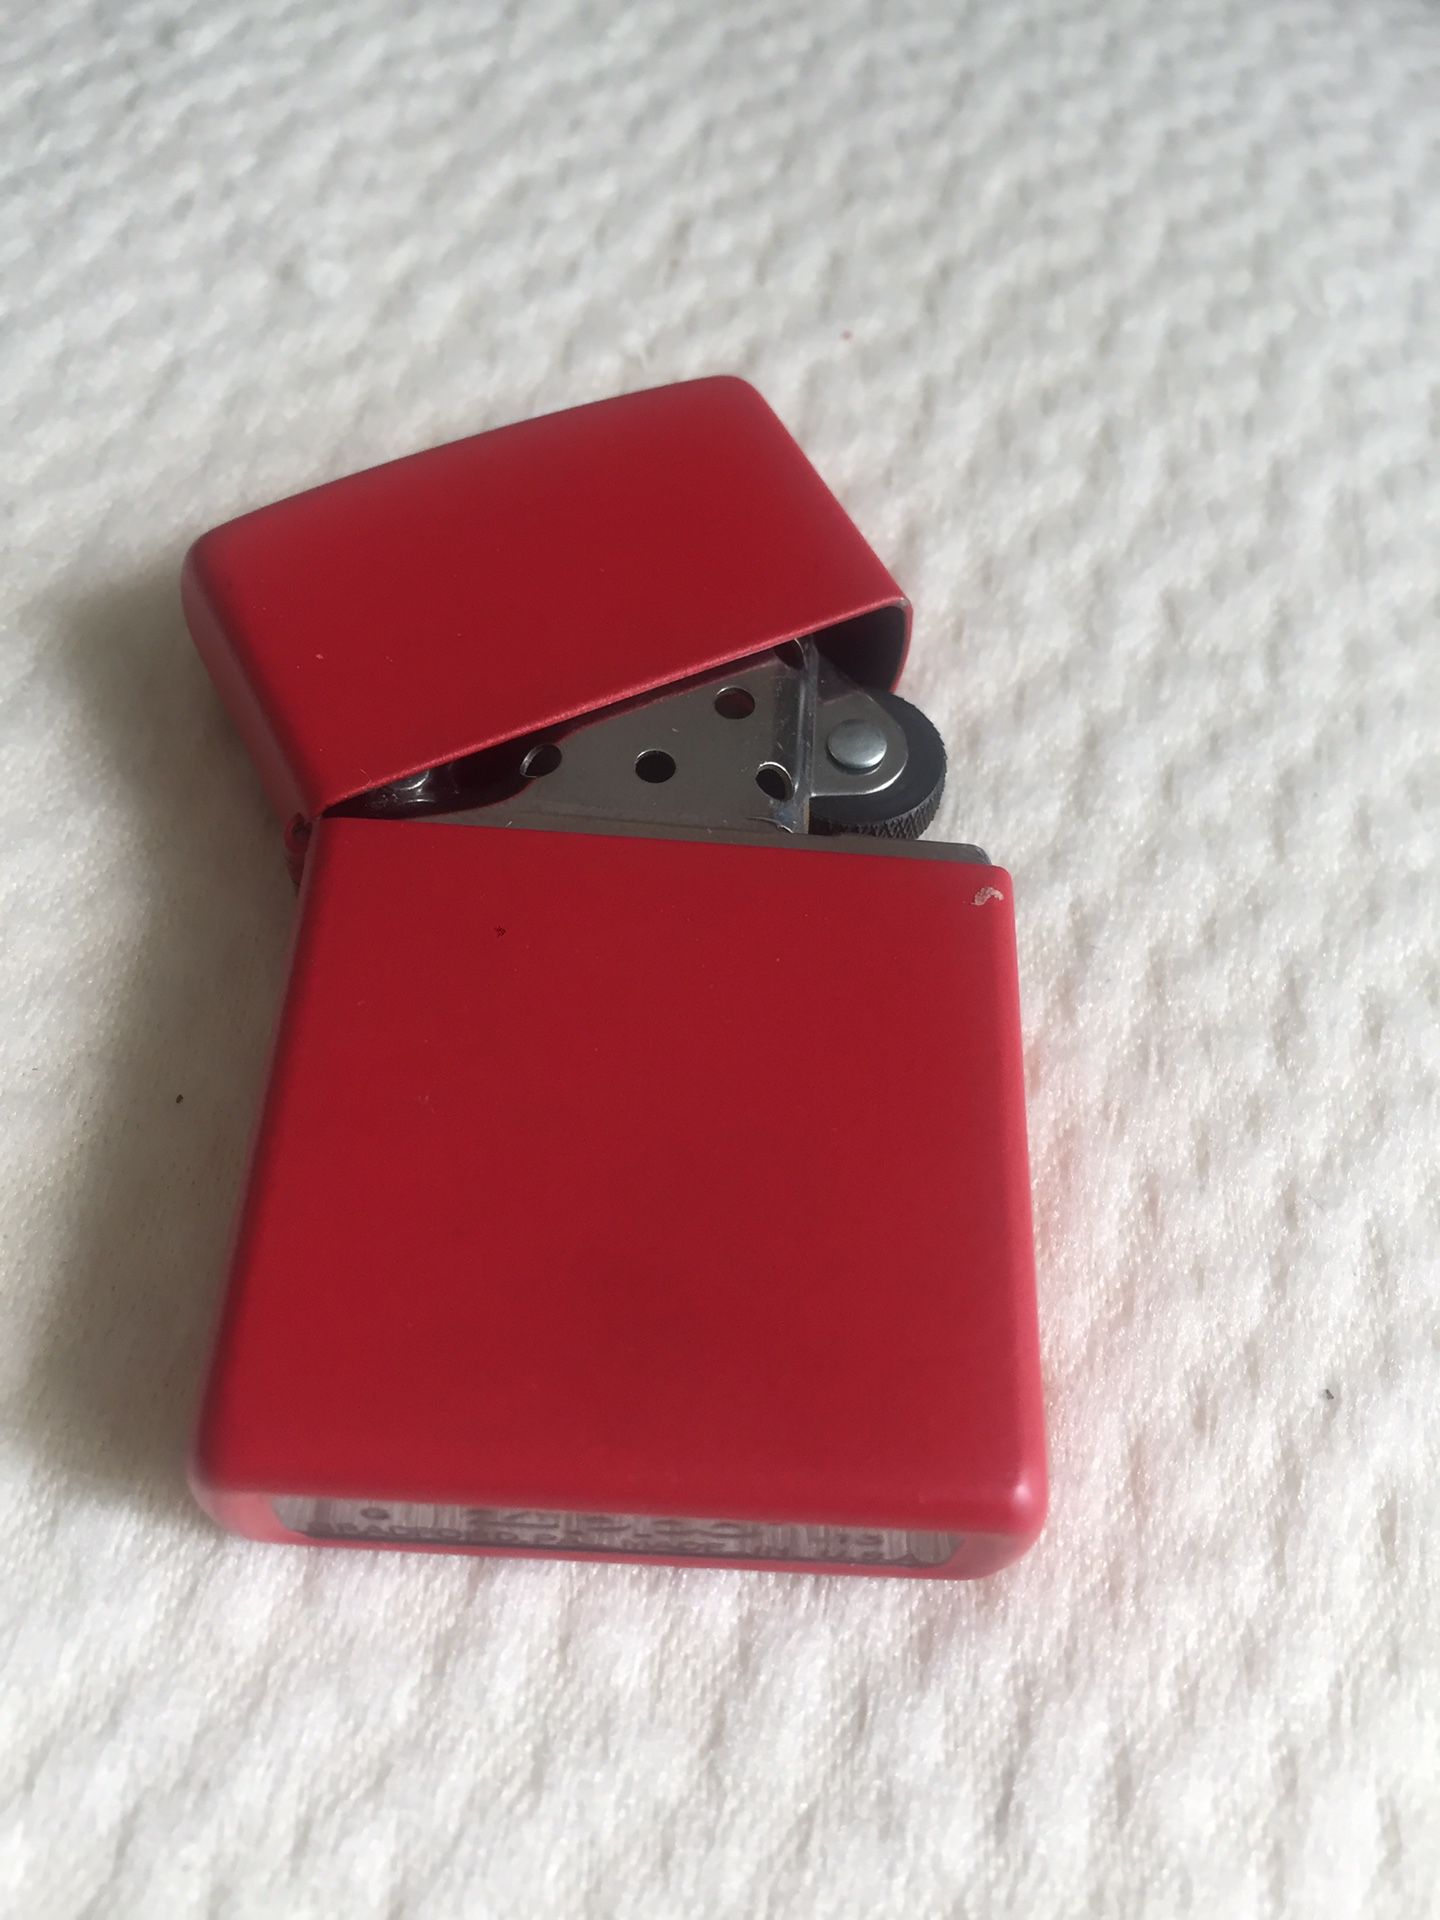 1 Red Zippo light made in USA